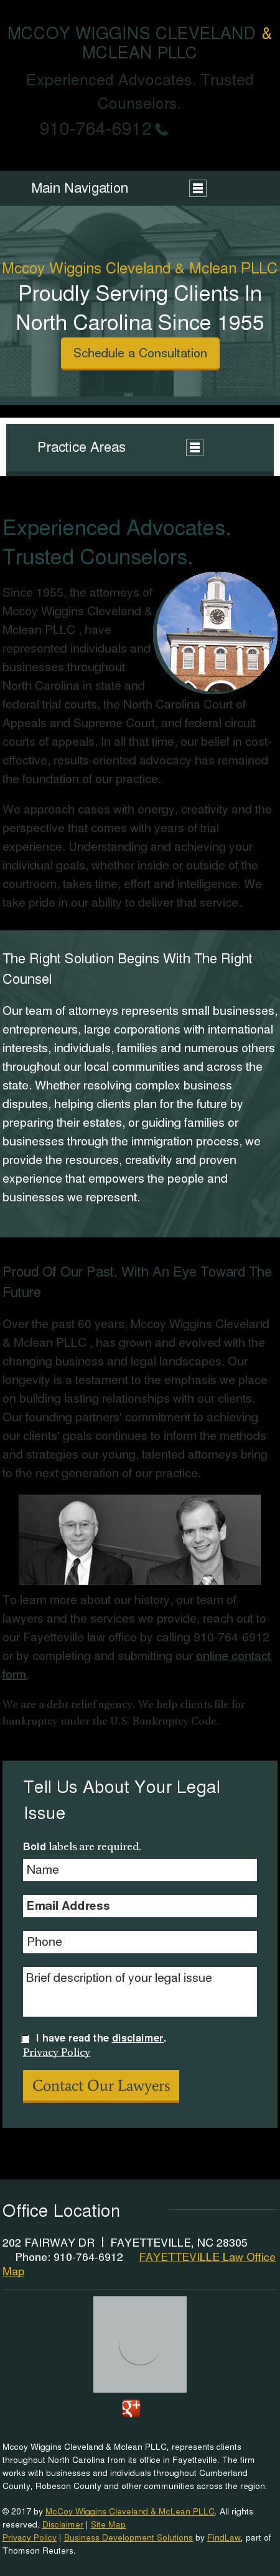 McCoy, Wiggins, Cleveland & O'Connor PLLC - Fayetteville NC Lawyers